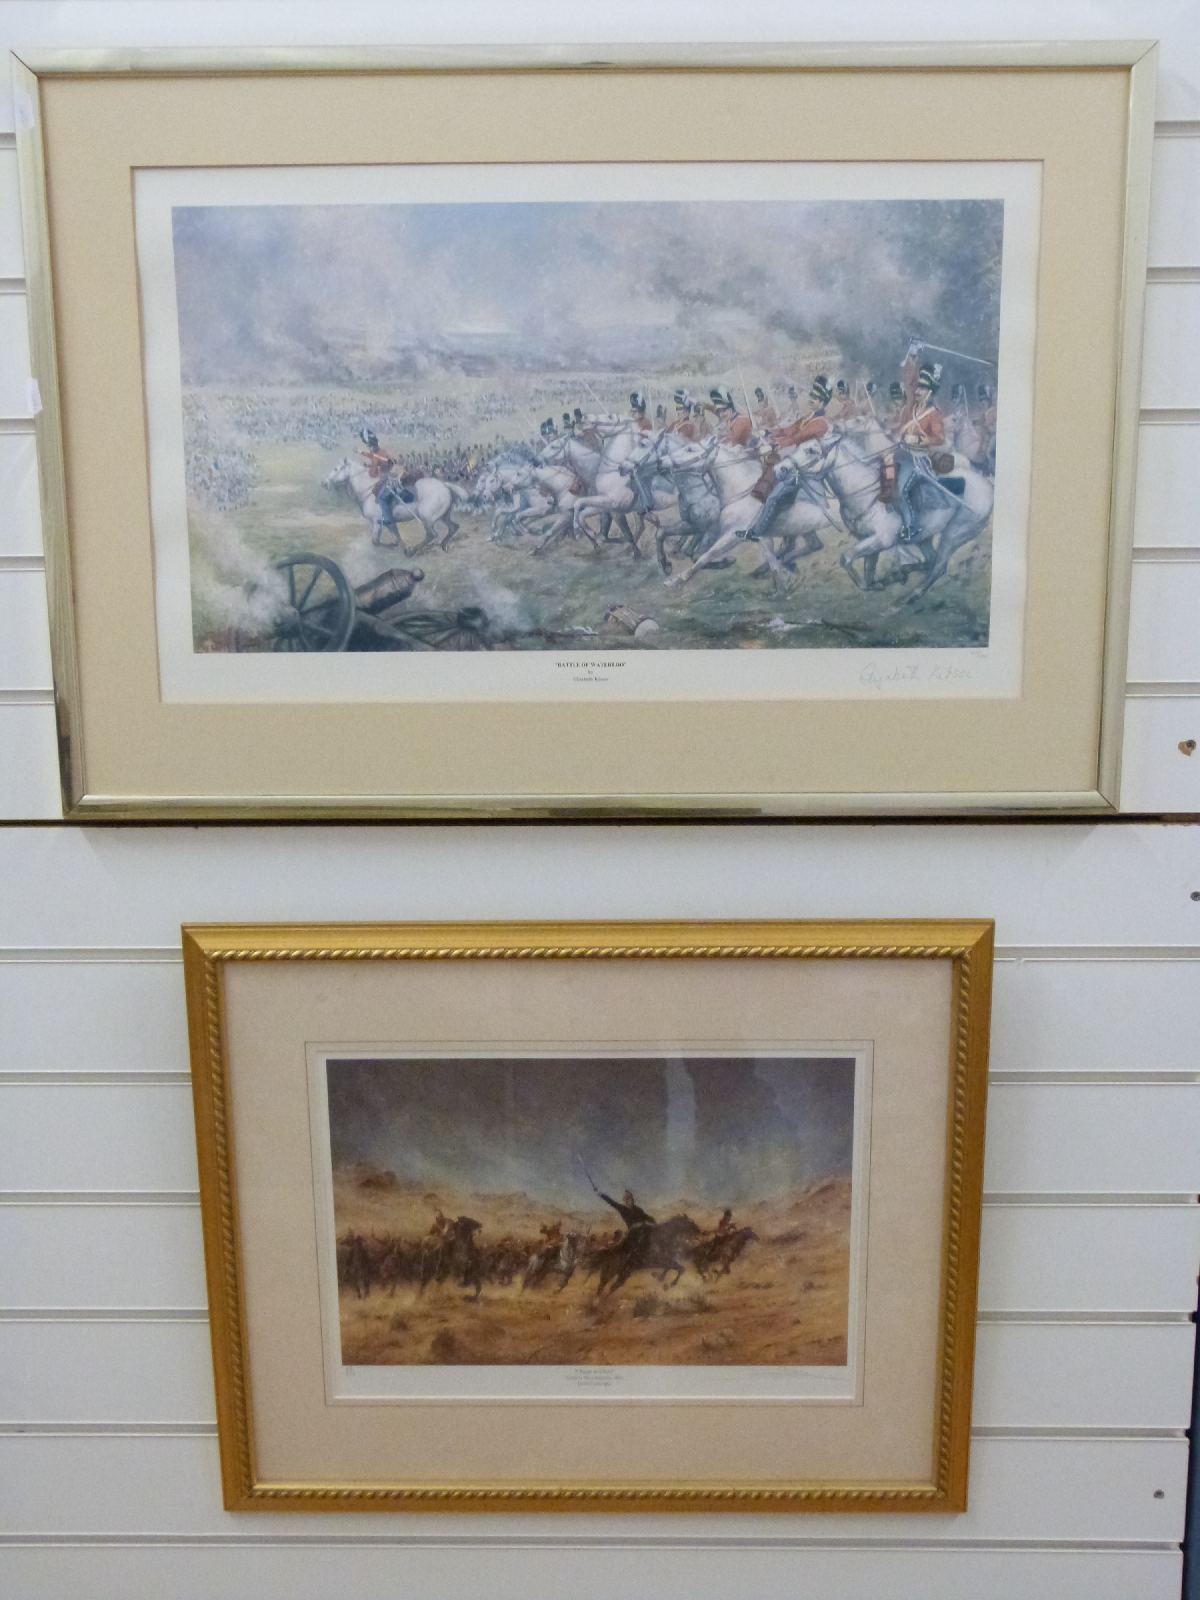 Elizabeth Kitson signed limited edition (215/500) print 'Battle of Waterloo' 38x63cm and David